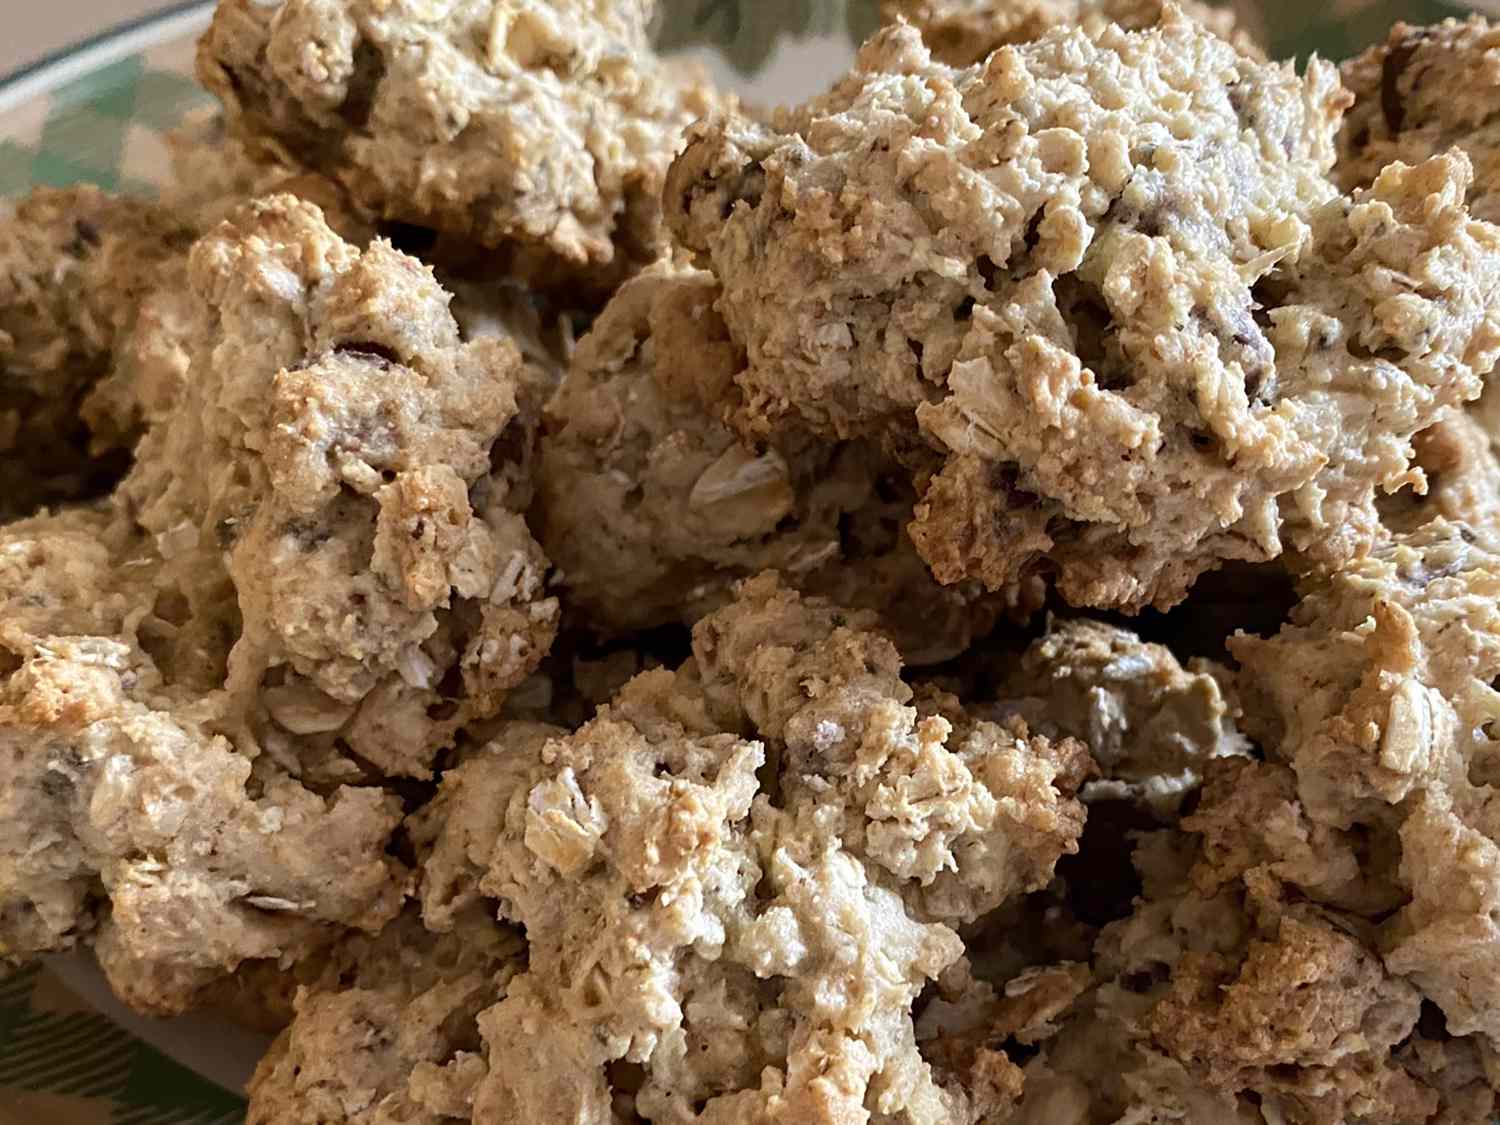 Close up view of a pile of Oatmeal Chocolate Chip Lactation Cookies on a plate